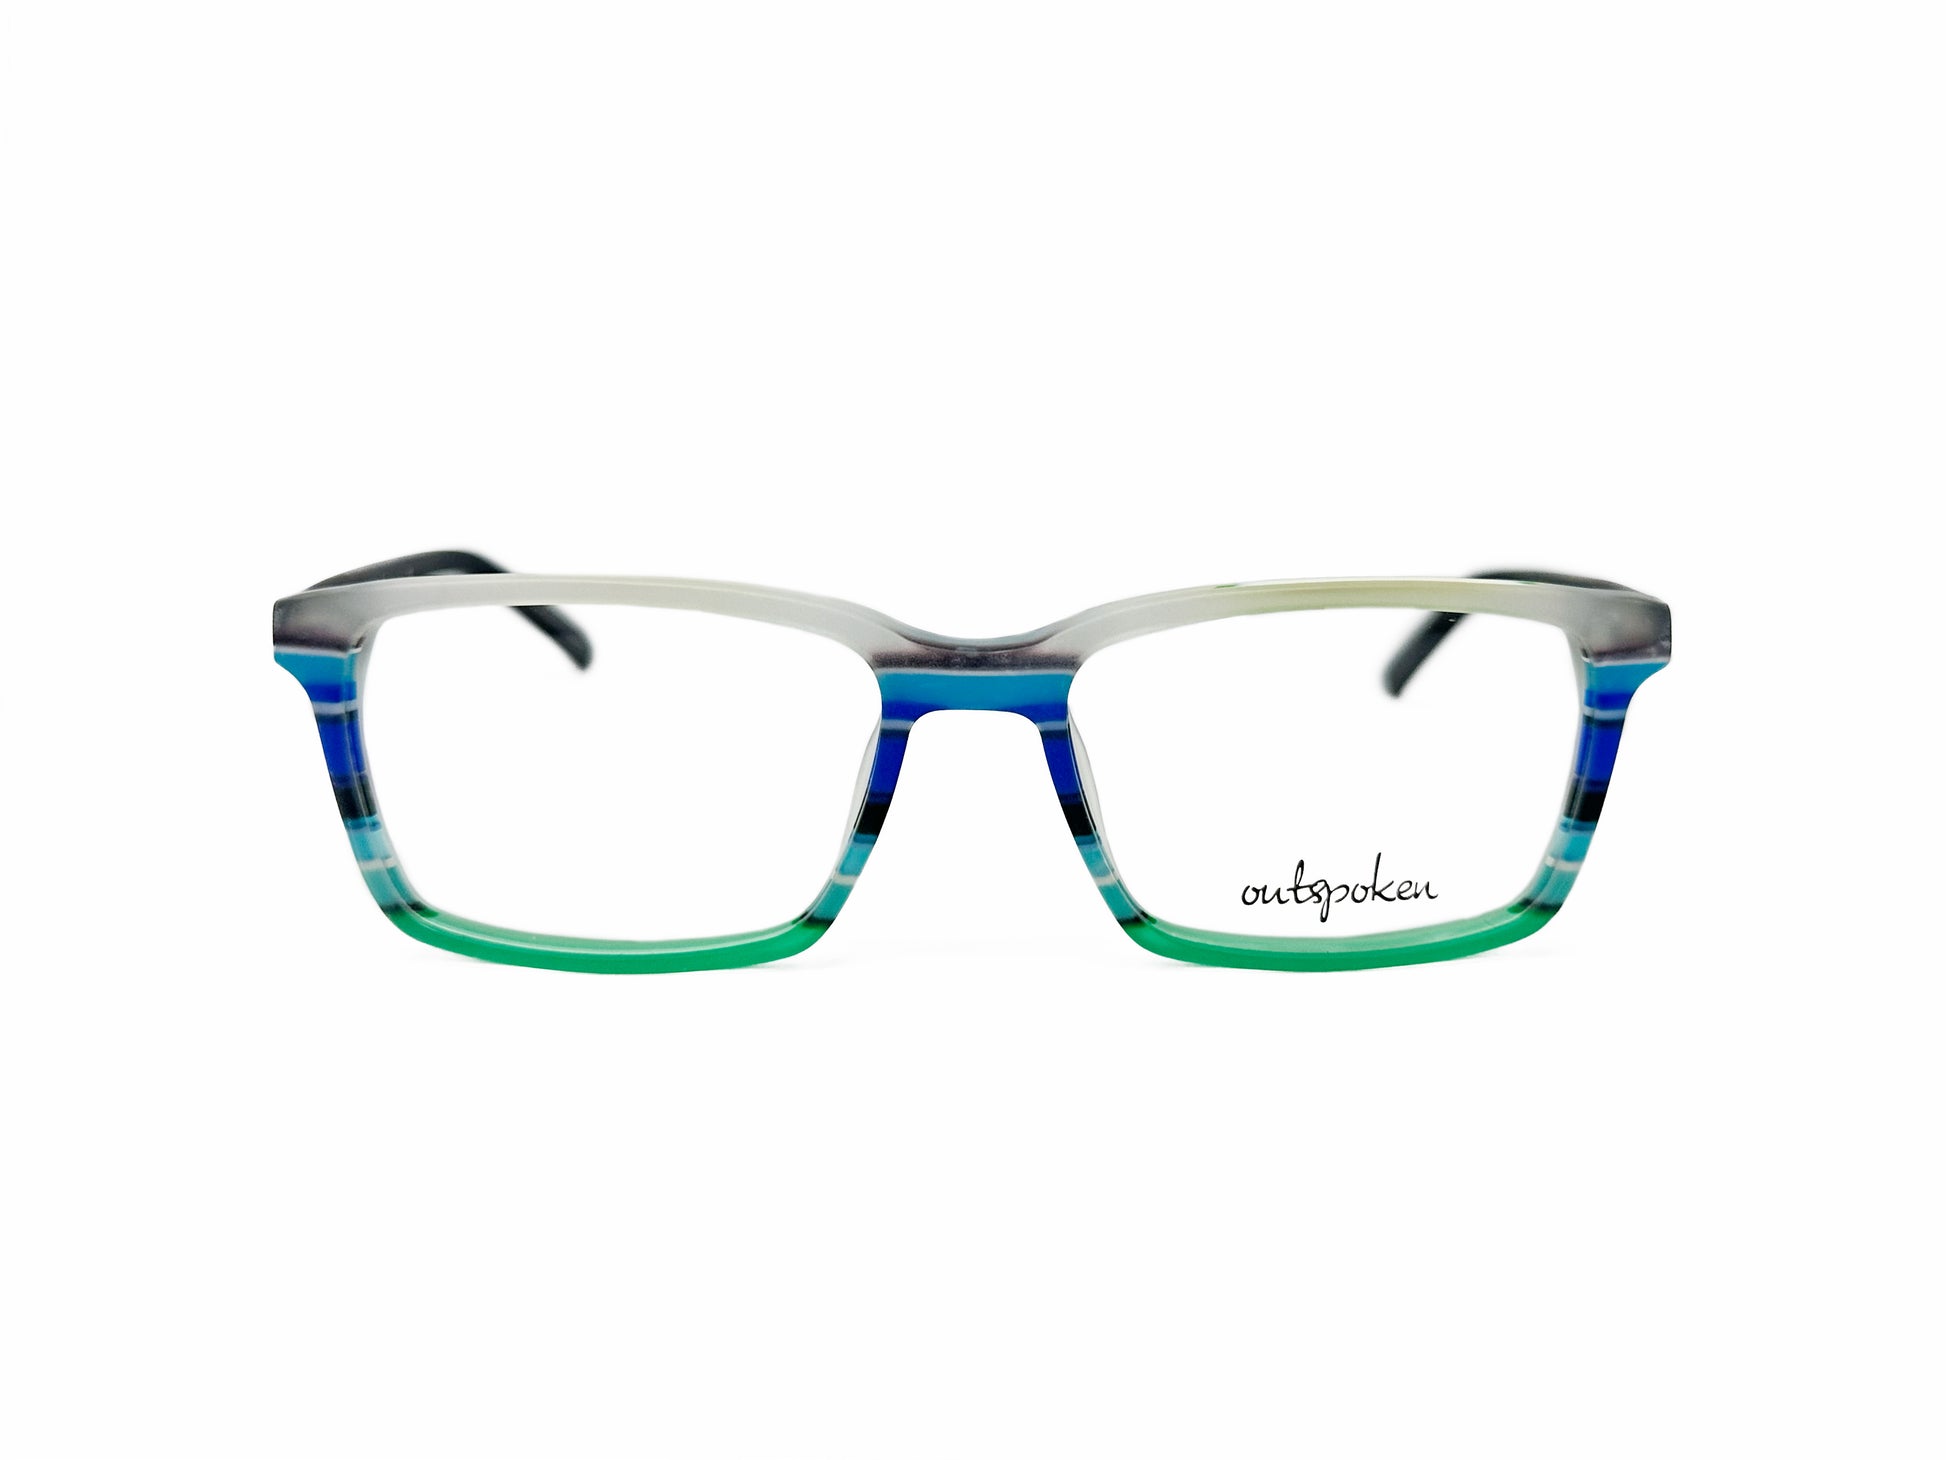 Outspoken rectangular acetate optical frame. Model: OA1603. Color: C03 - Blue, green, and white stripes. Front view. 